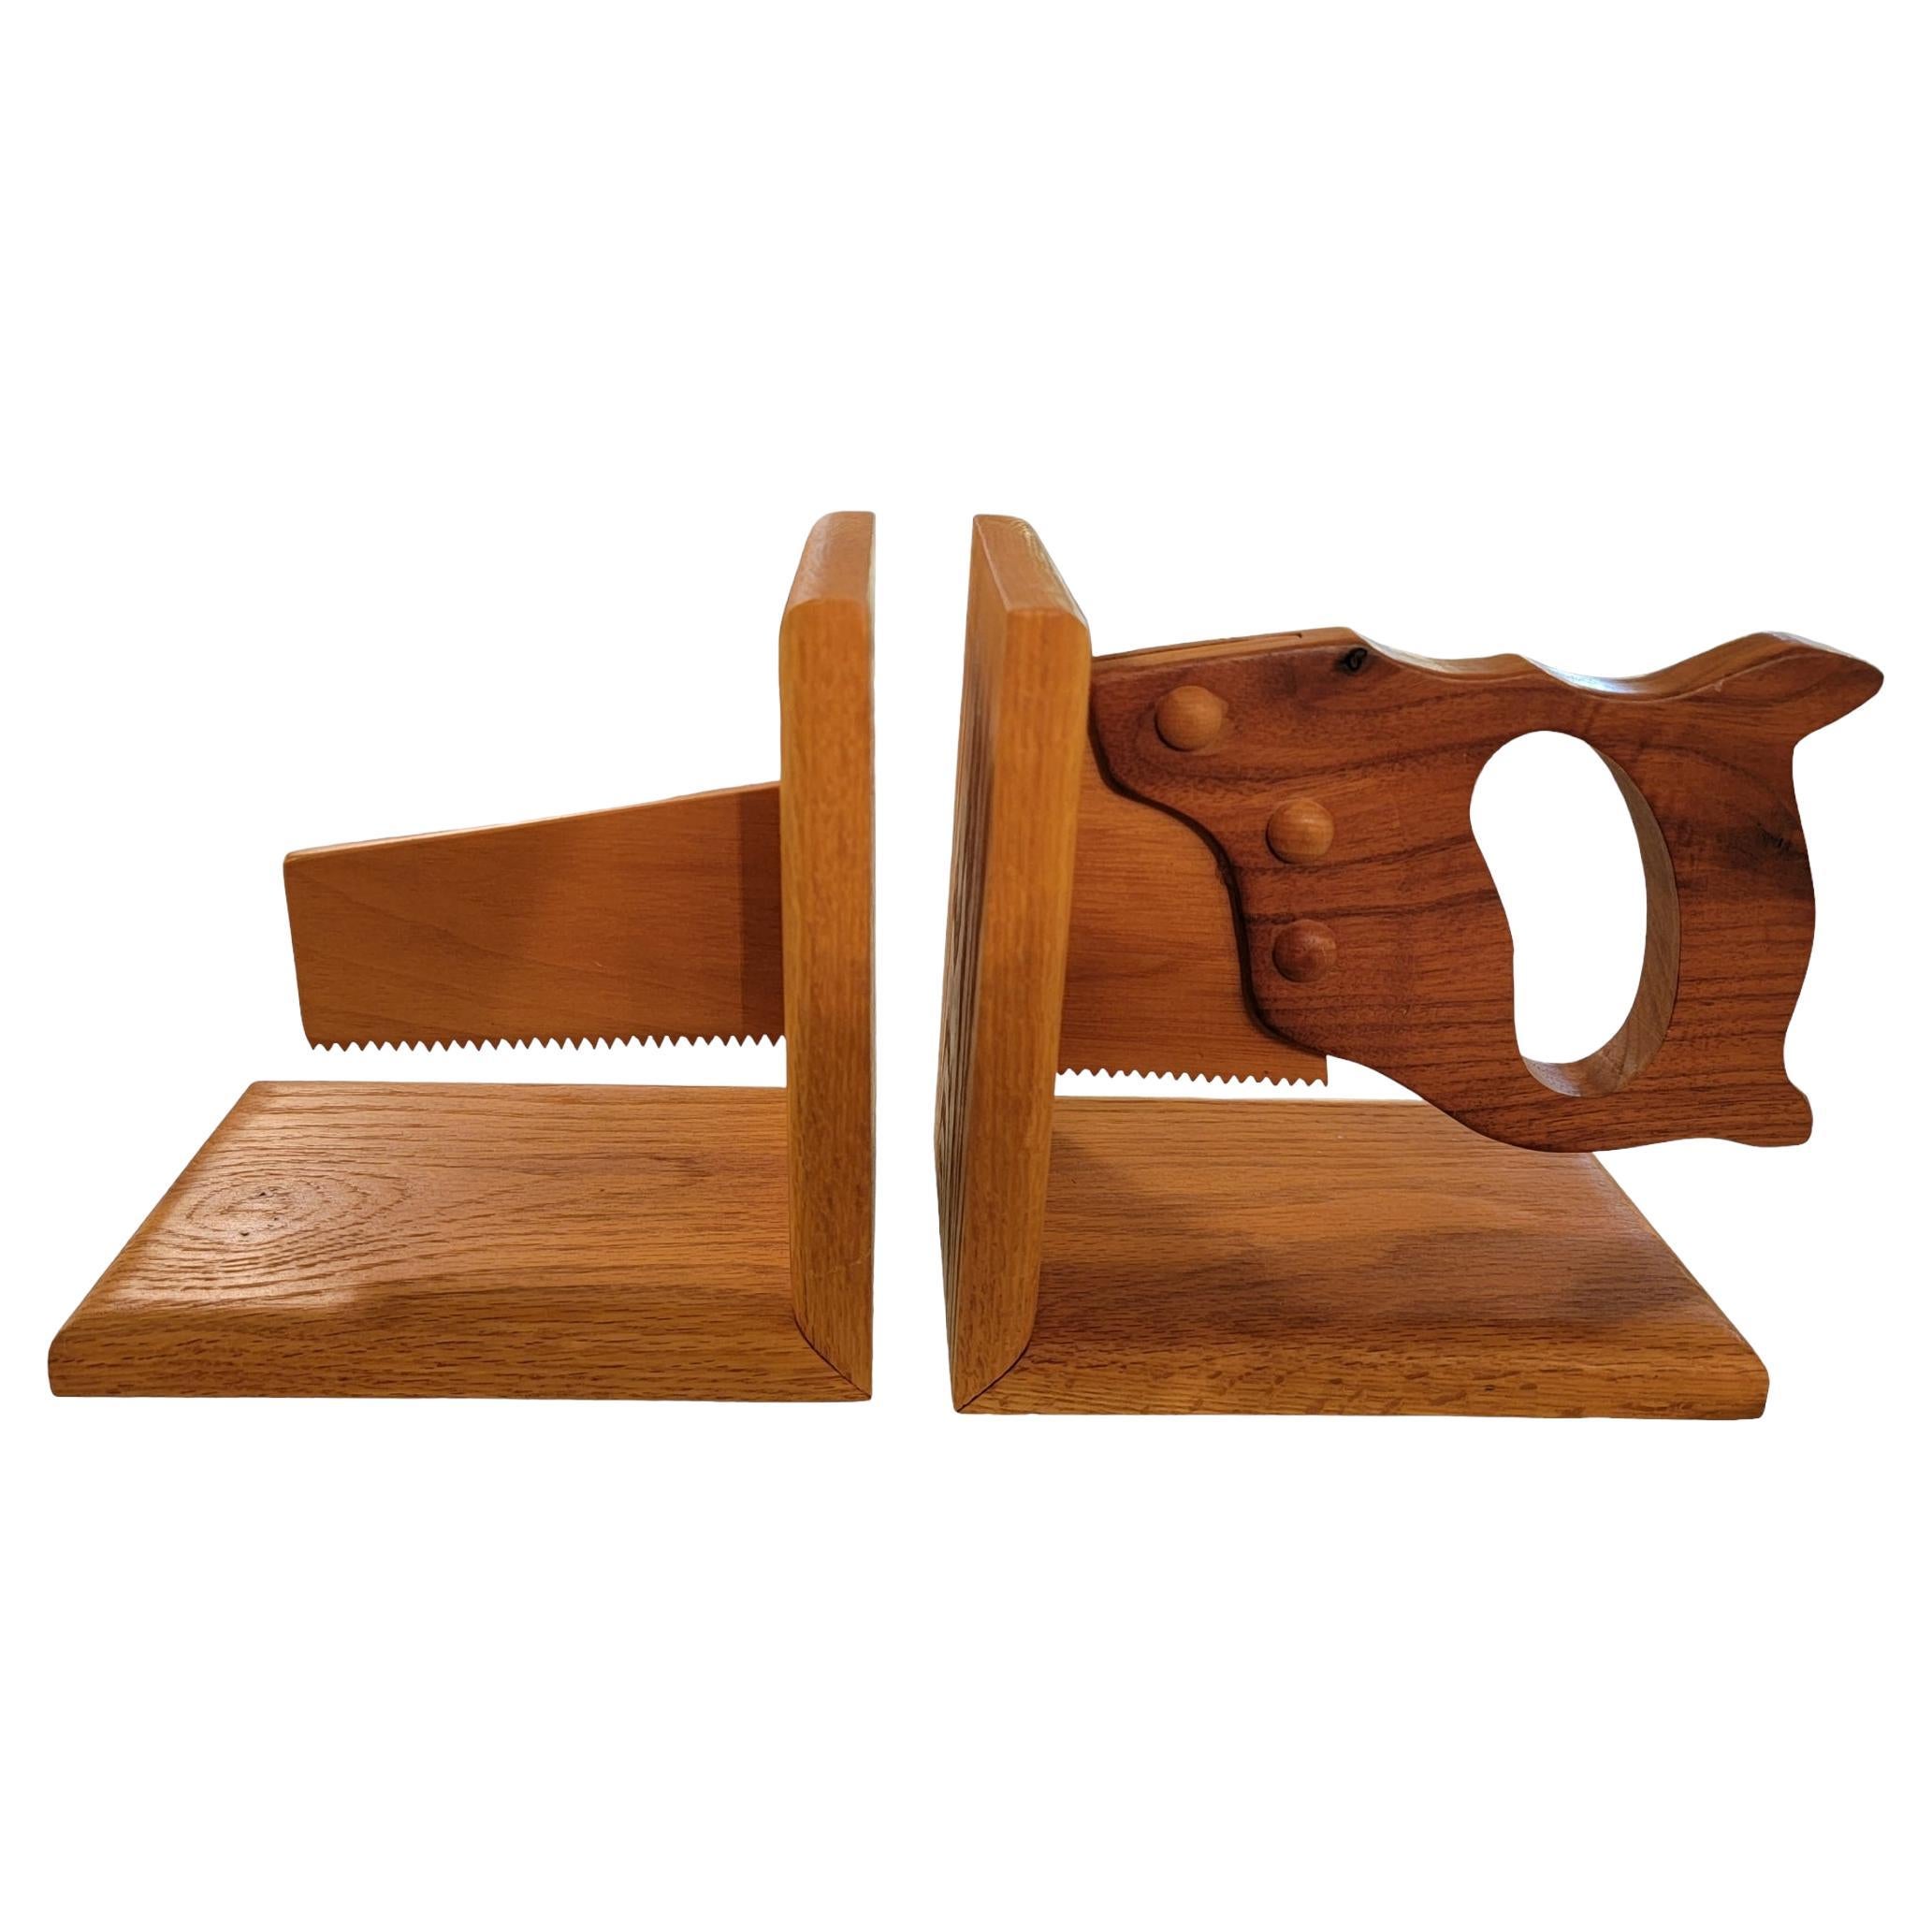 Wooden Hand Made Hand Saw Bookends